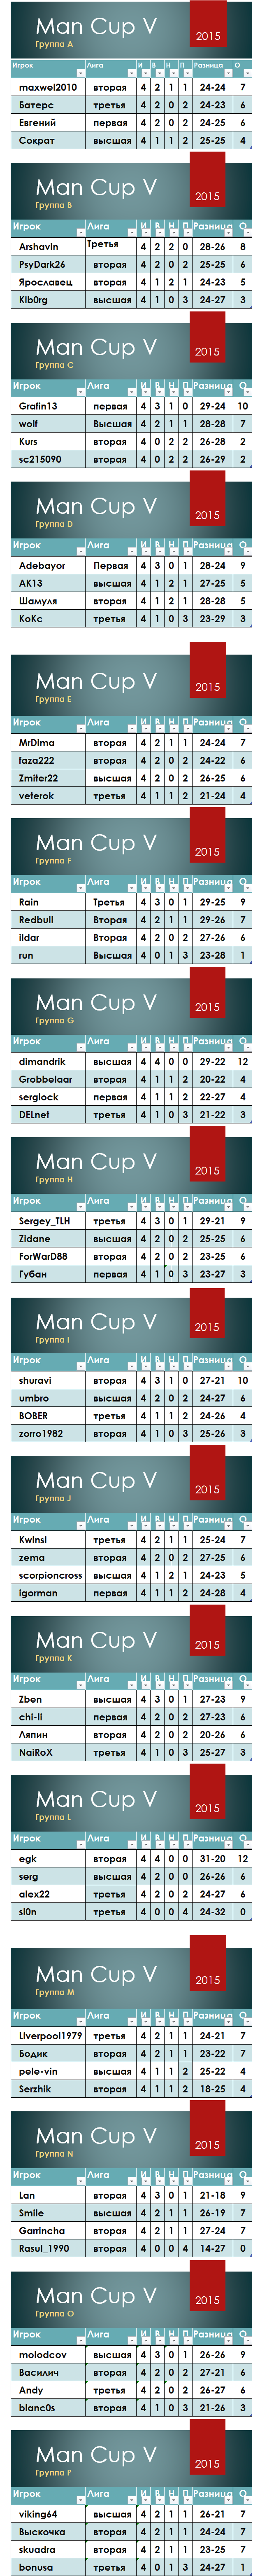 Man Cup V.png